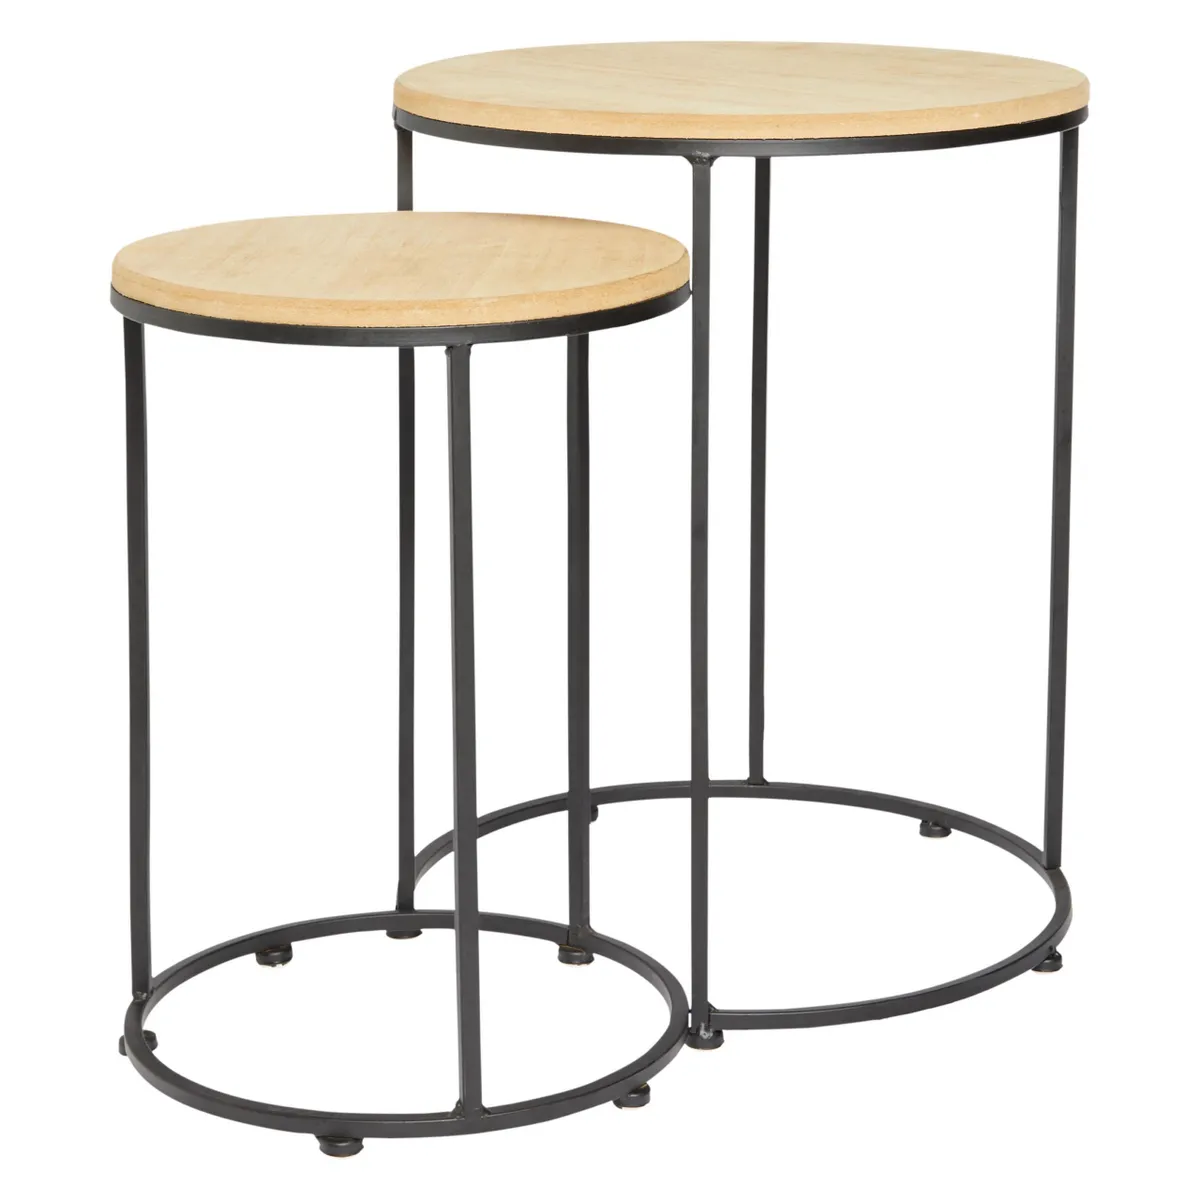 Brown wood effect circle nesting tables, £30